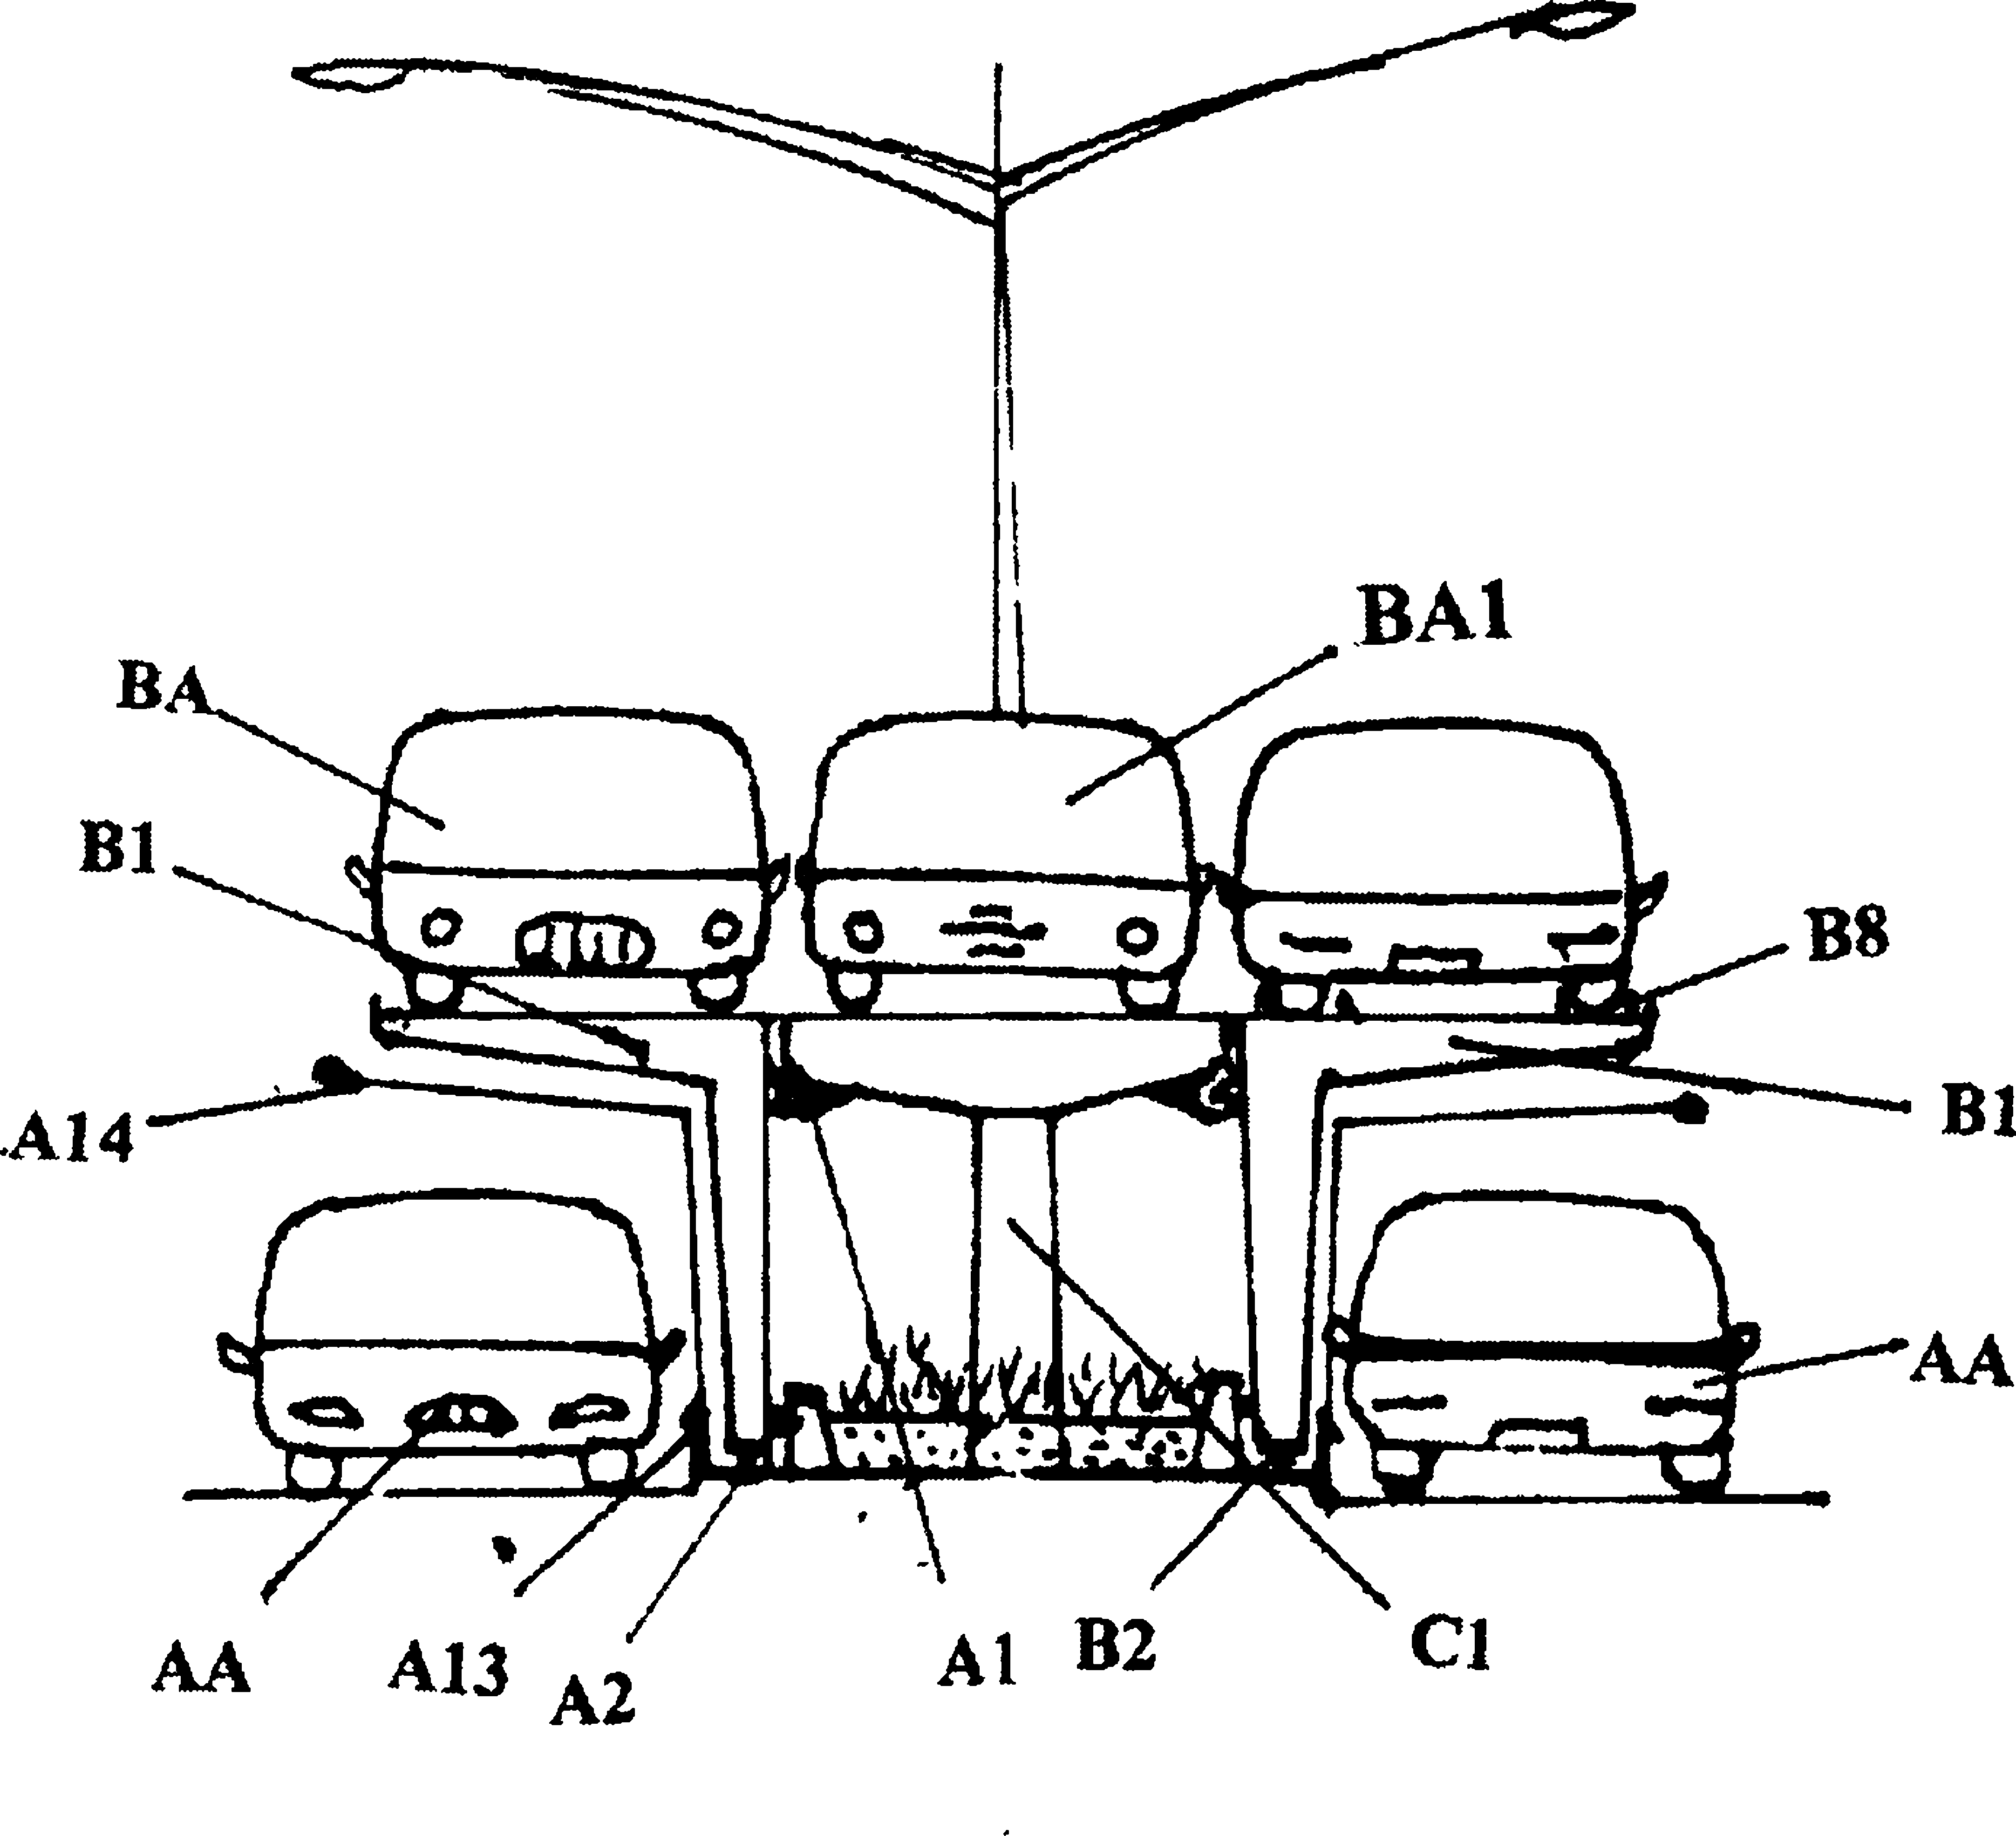 Multifunctional composite rapid railway transport vehicle and system for carrying vehicles